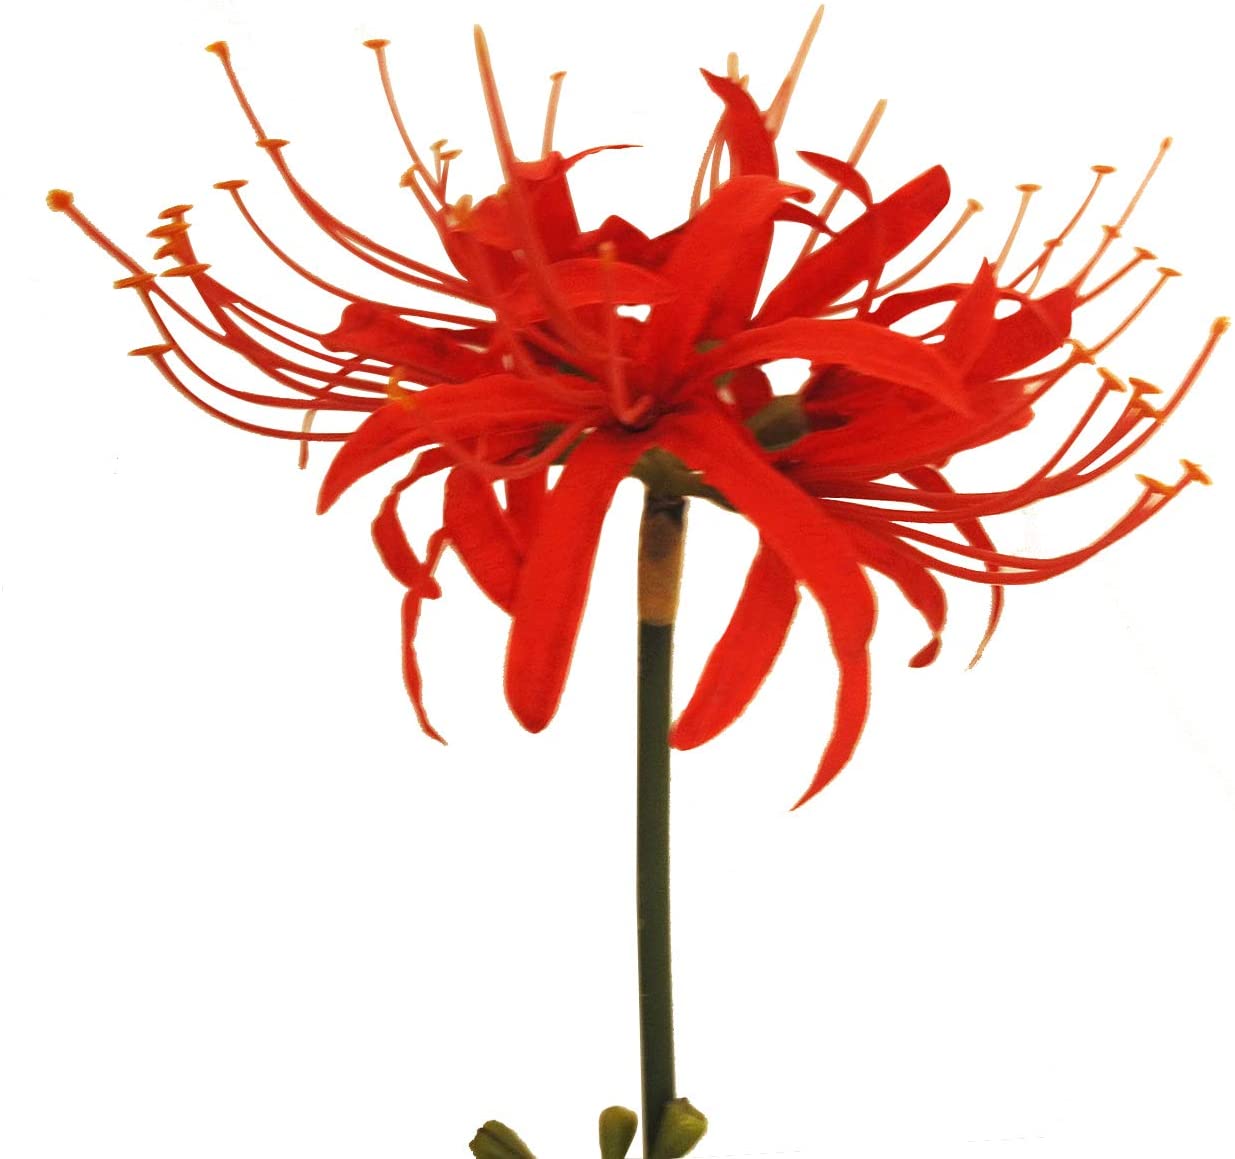 Spider Lilies Flowering plant